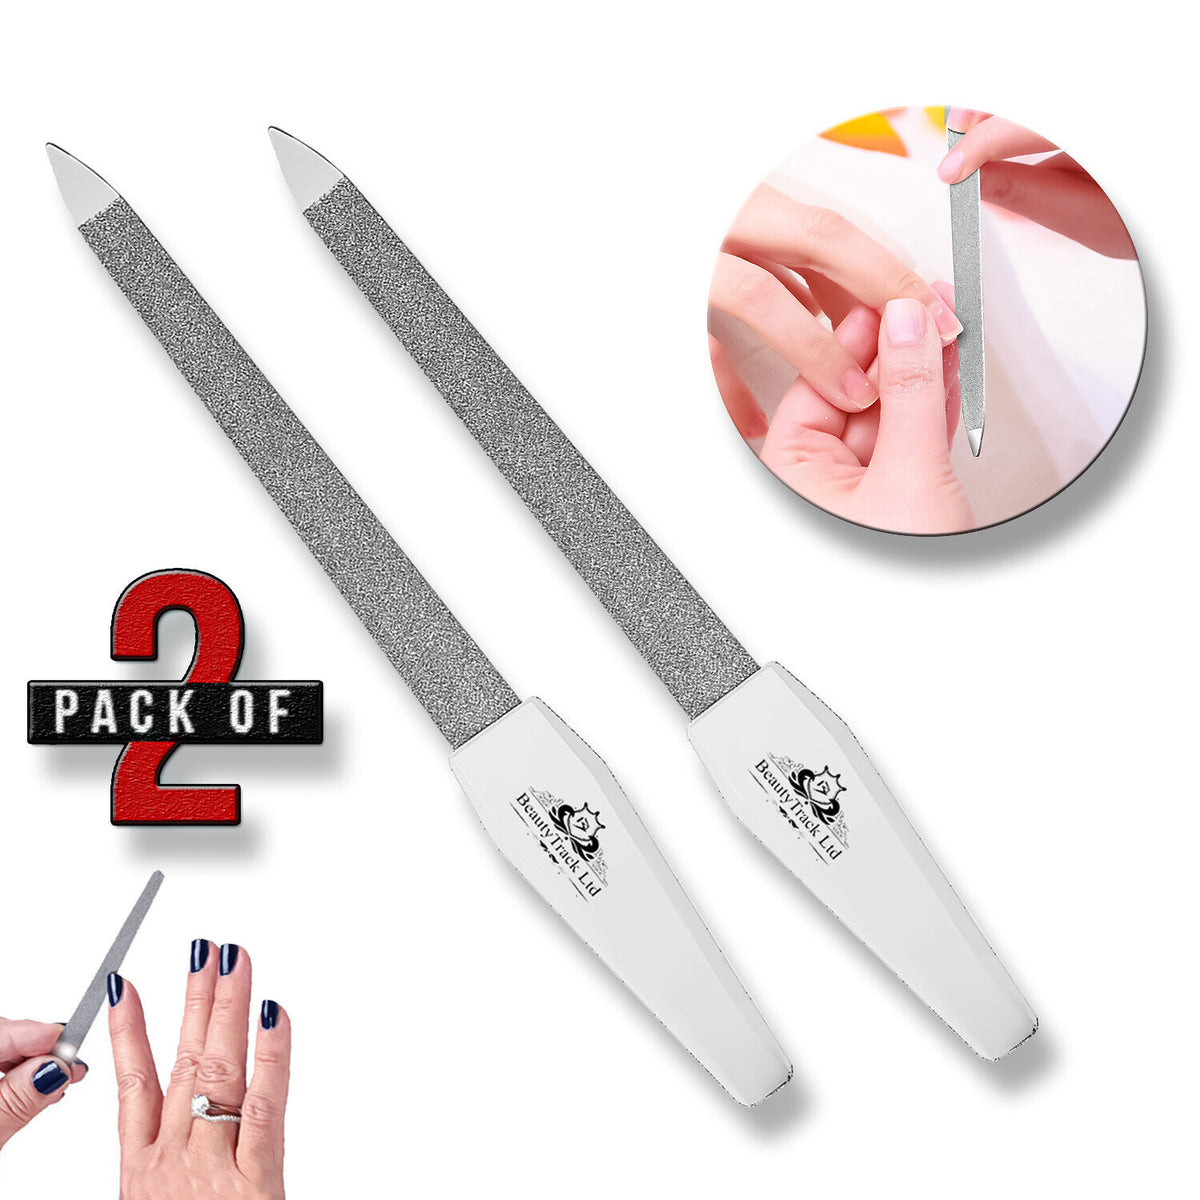 Metal File for Nails